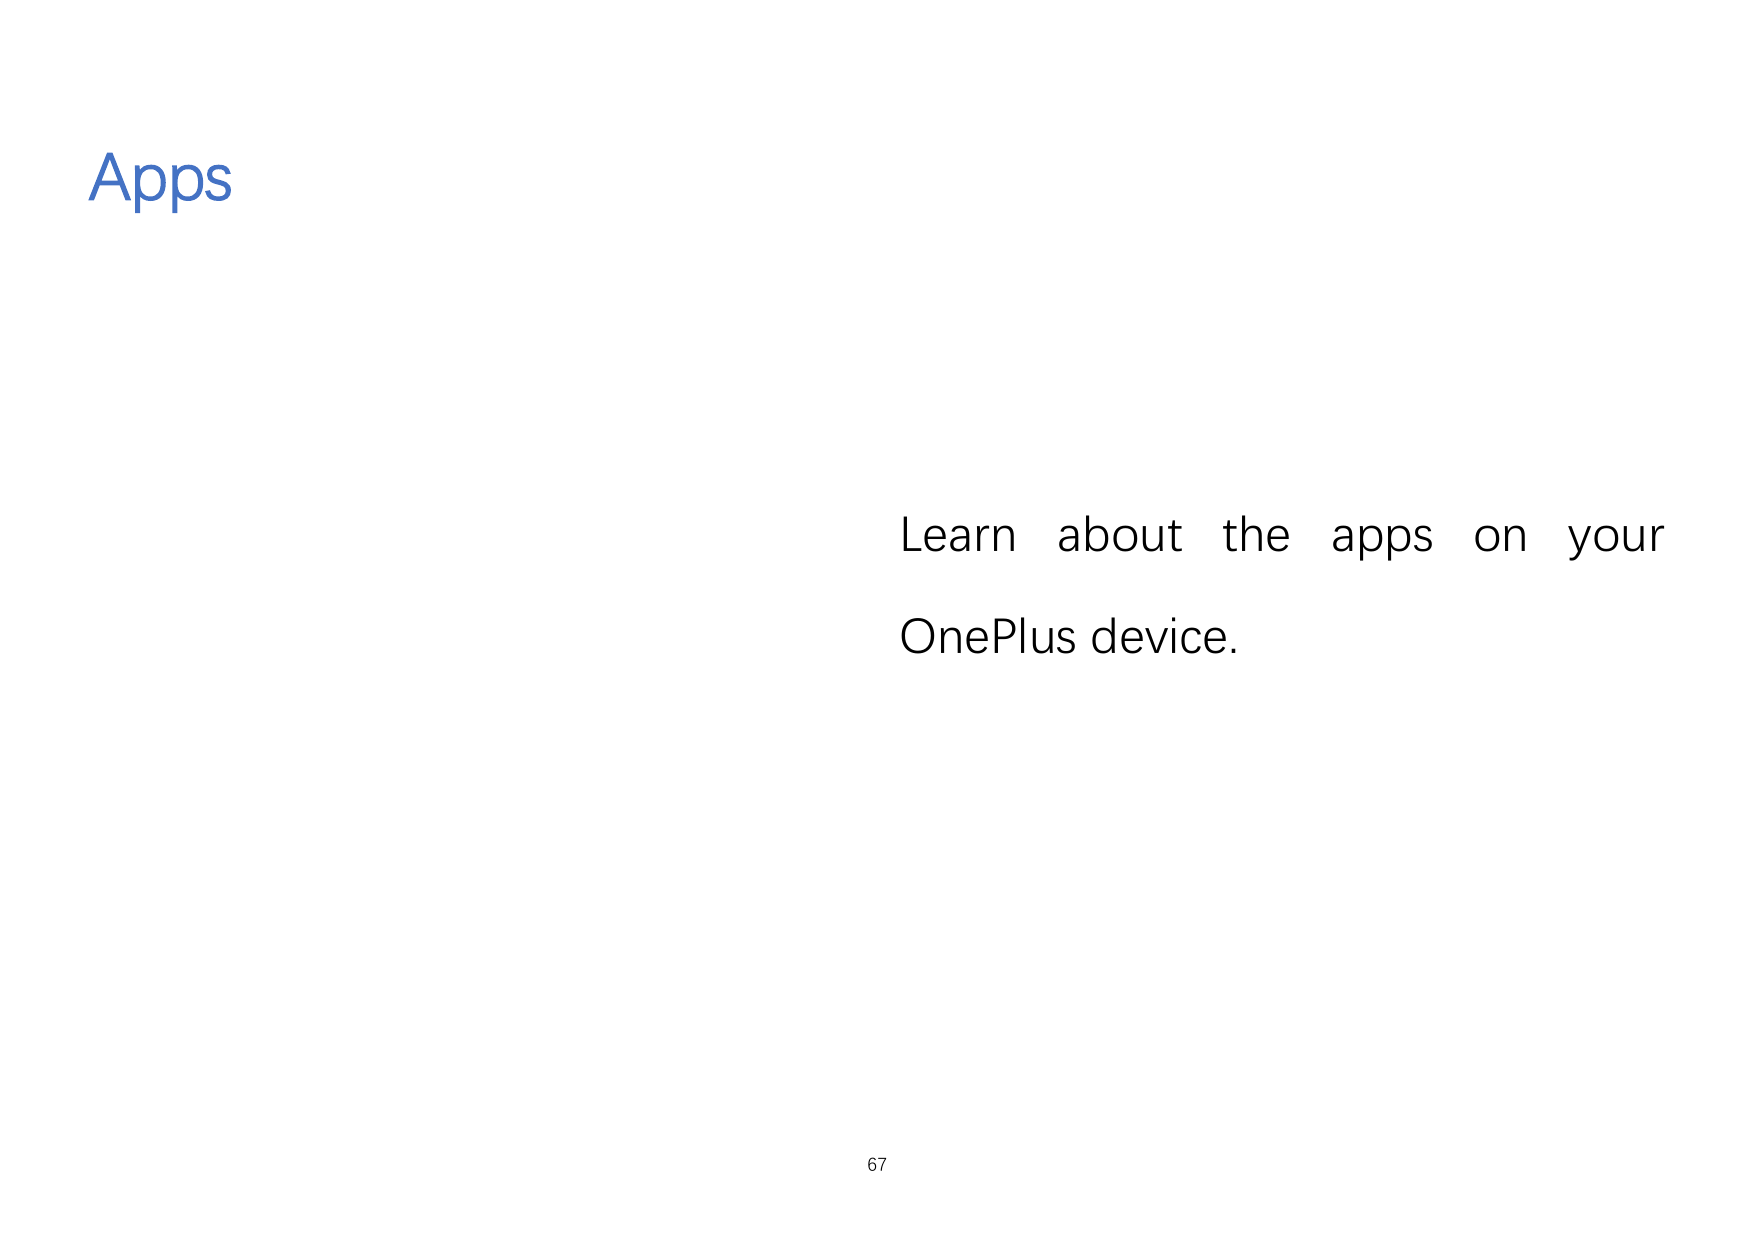 AppsLearn about the apps on yourOnePlus device.67